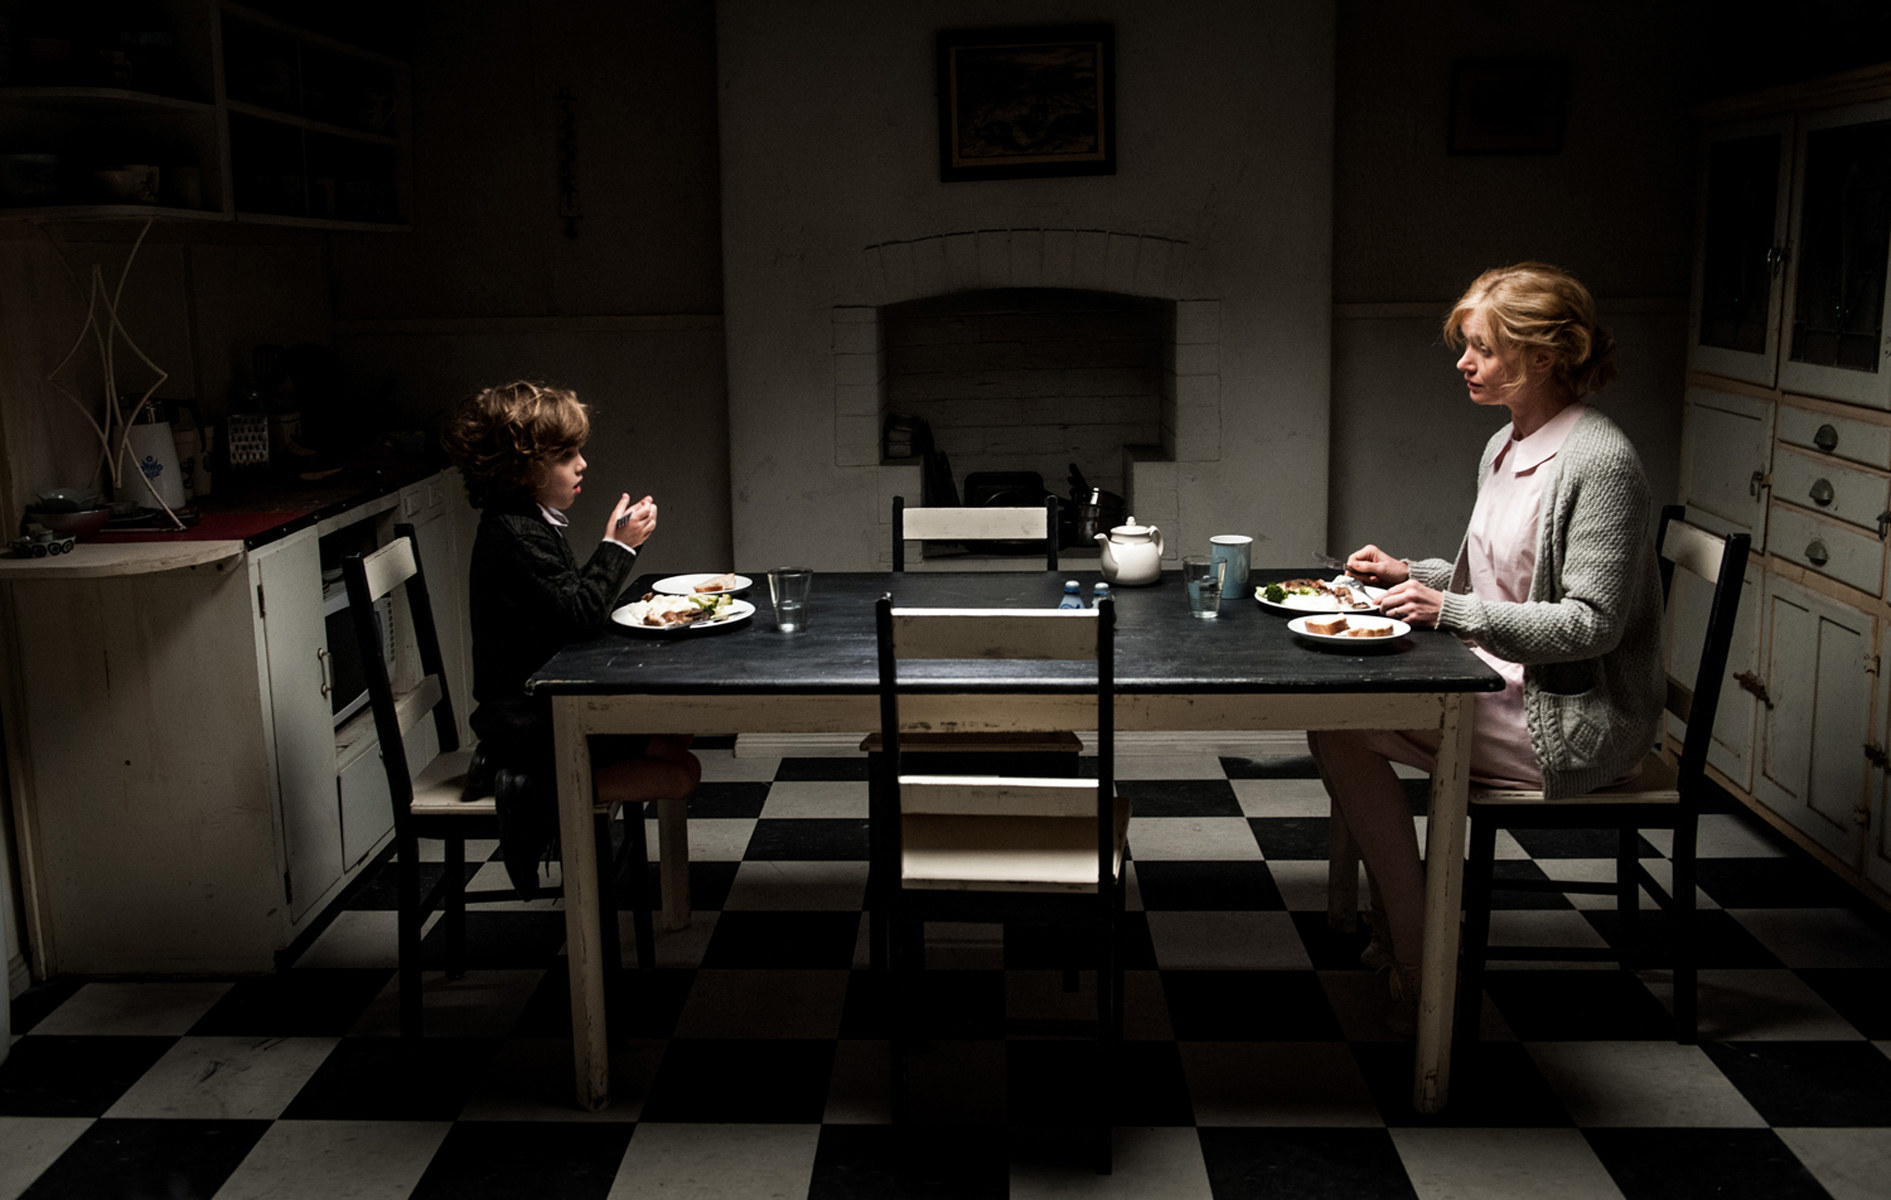 Noah Wiseman and Essie Davis sit across the table from each other